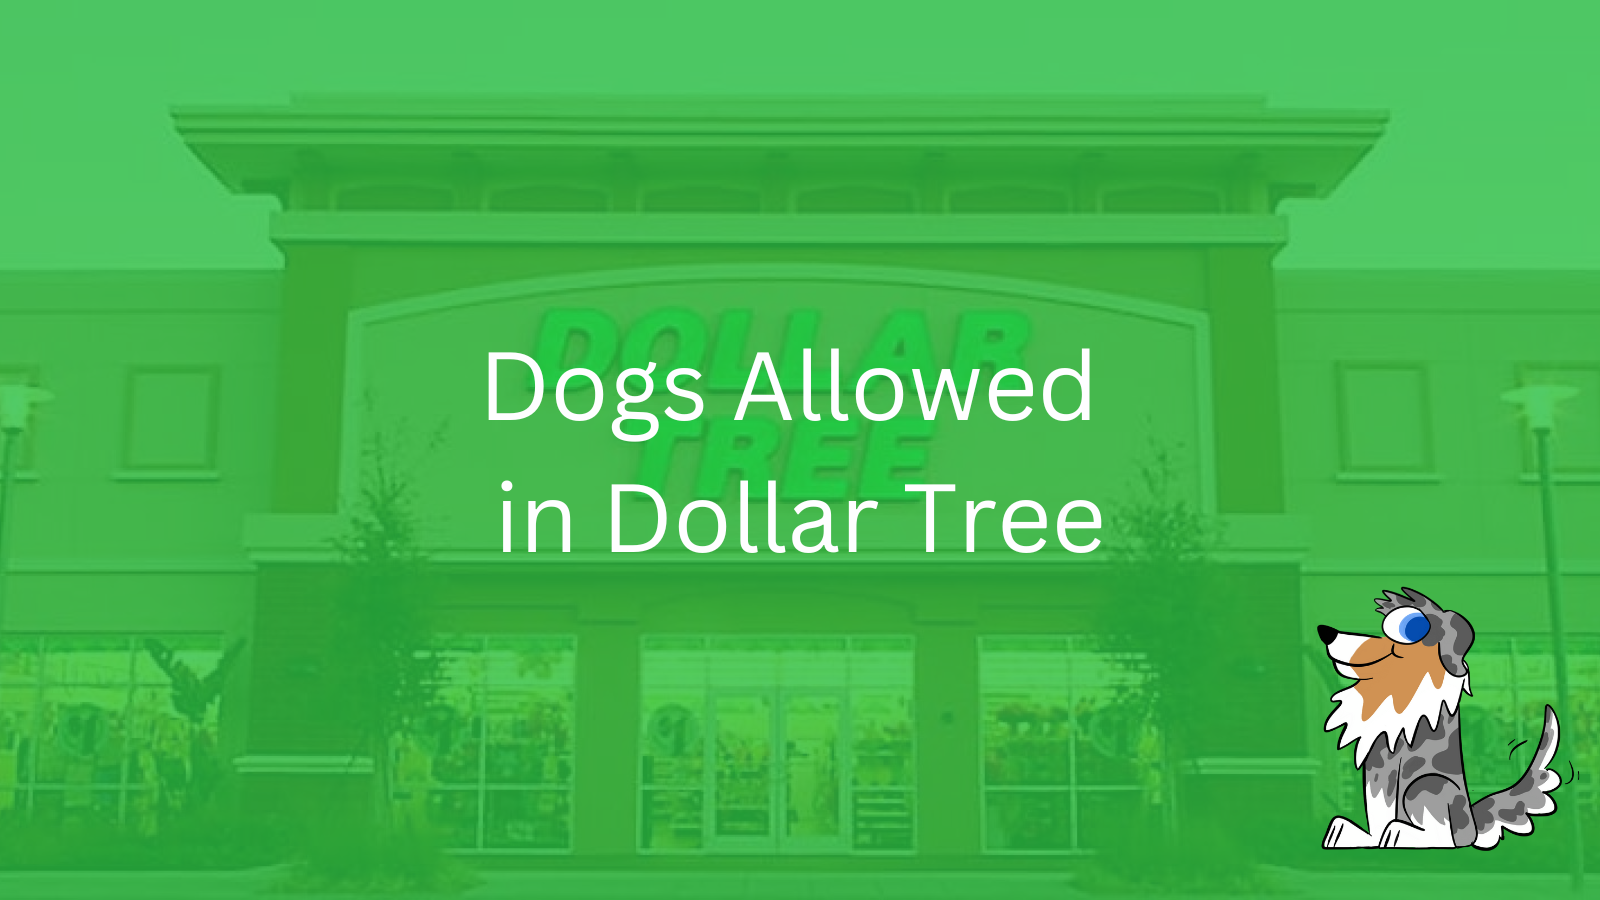 Image Text: "Dogs Allowed in Dollar Tree"